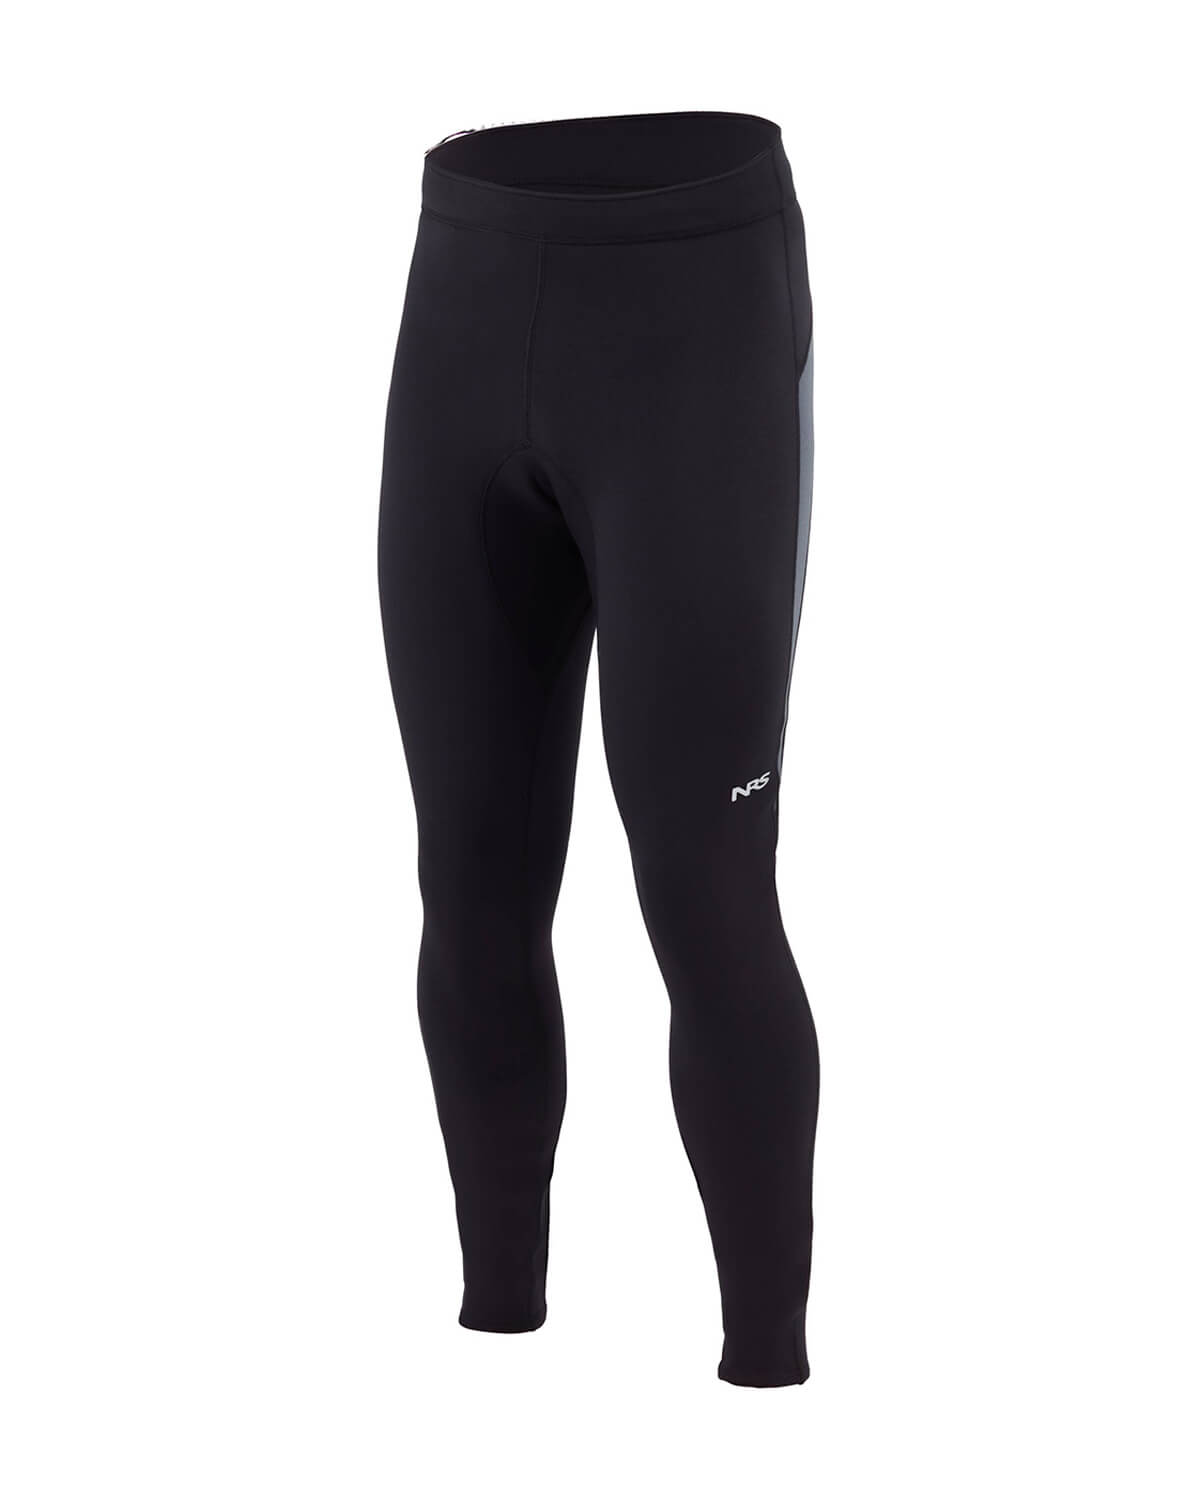 2mm Men's NRS IGNITOR Wetsuit Pants